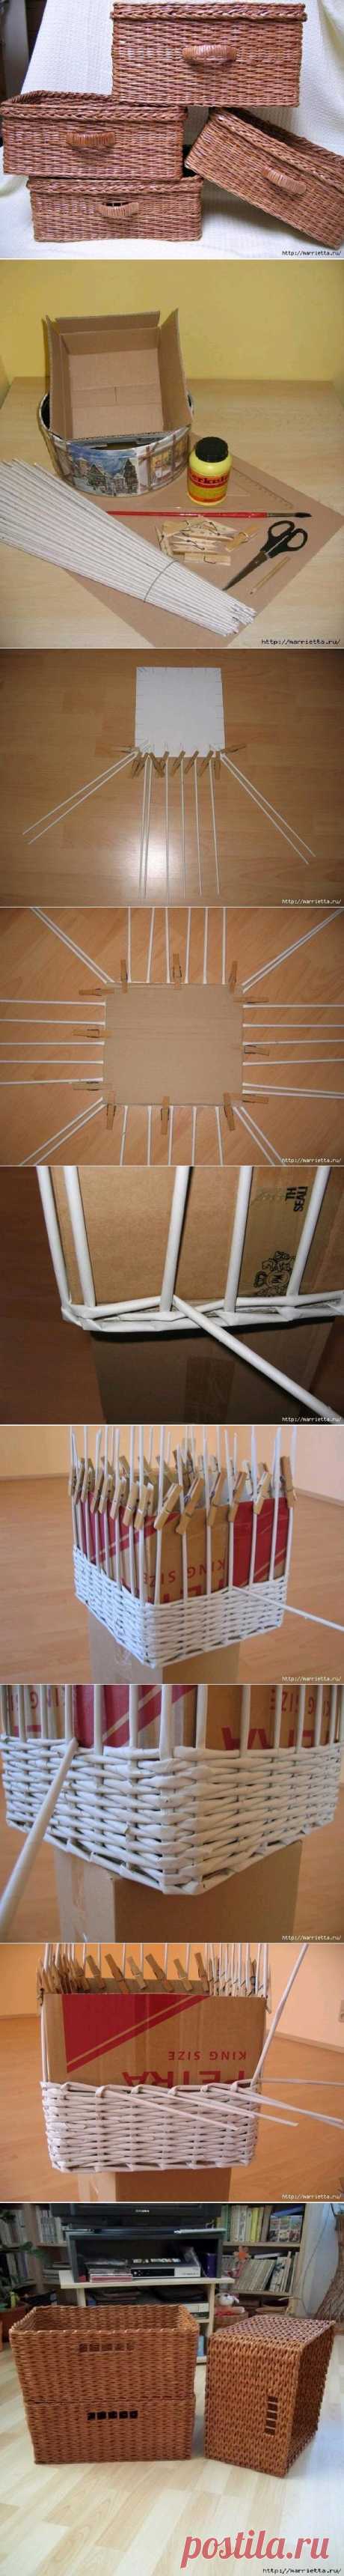 DIY Newspaper Weave Basket | FabDIY Making a few weave baskets can be loads of fun and the best...